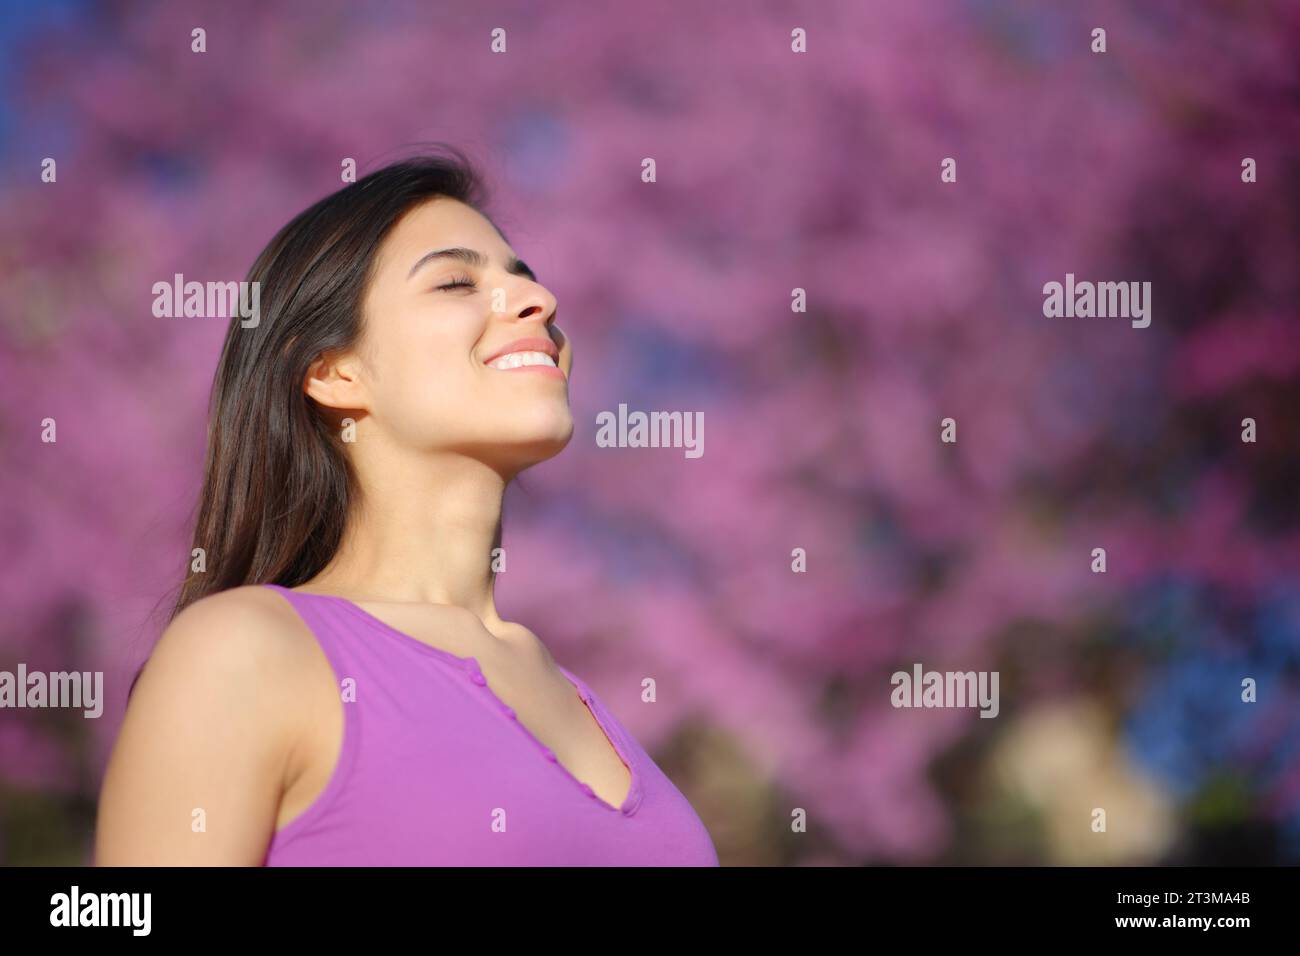 Happy woman breathing fresh air on violet background in a park Stock Photo